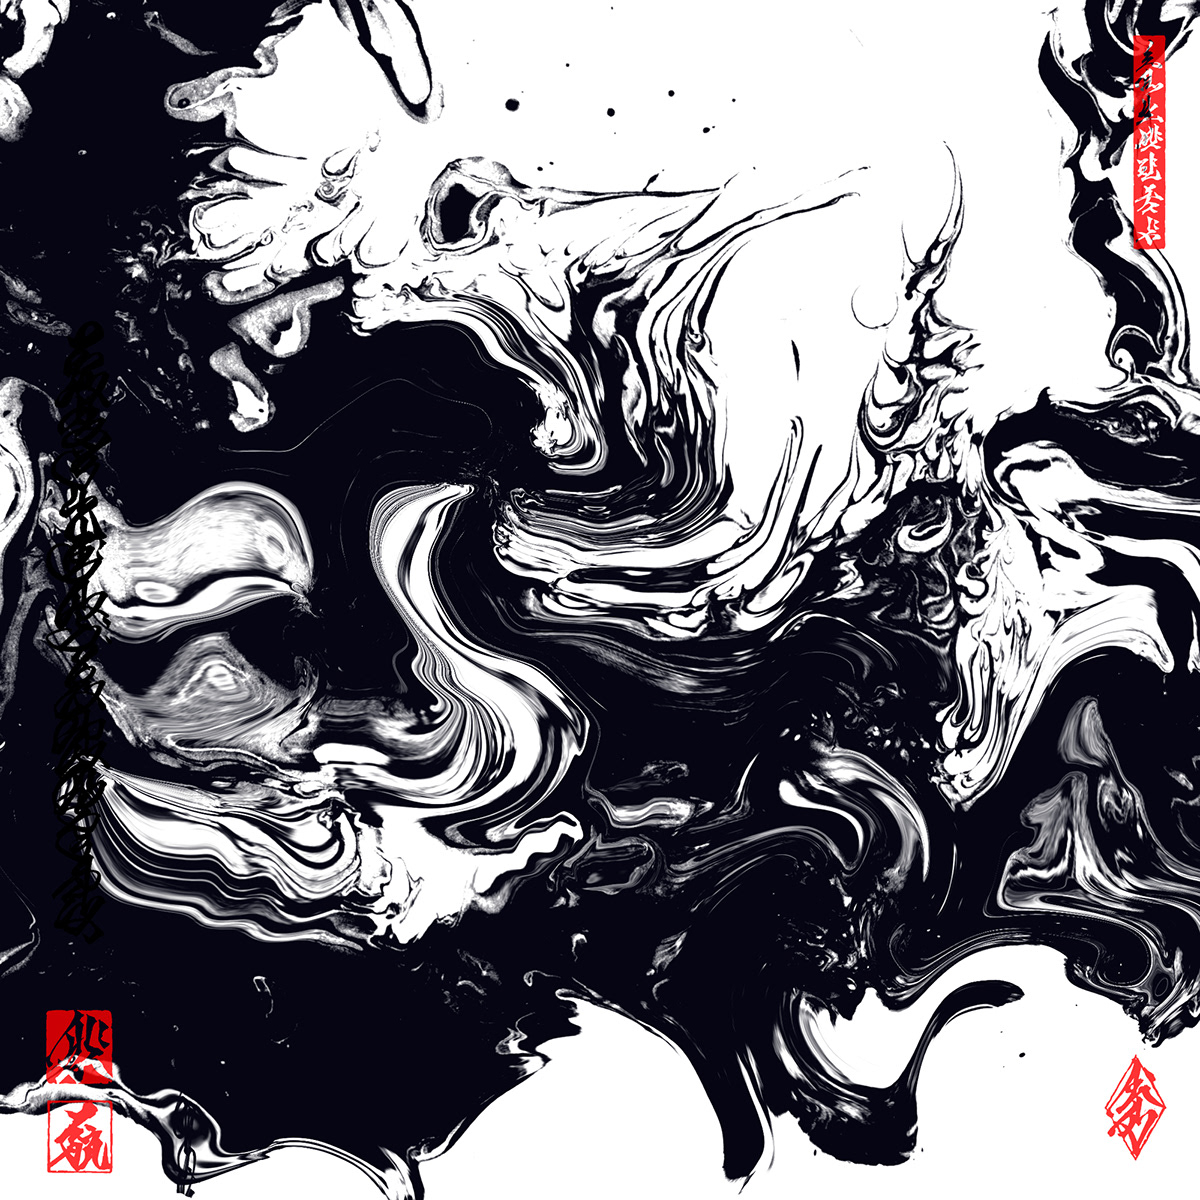 marbling Exhibition  contemporary underground Butoh Dance Performance musician electronicmusic caligraphy Logo Design